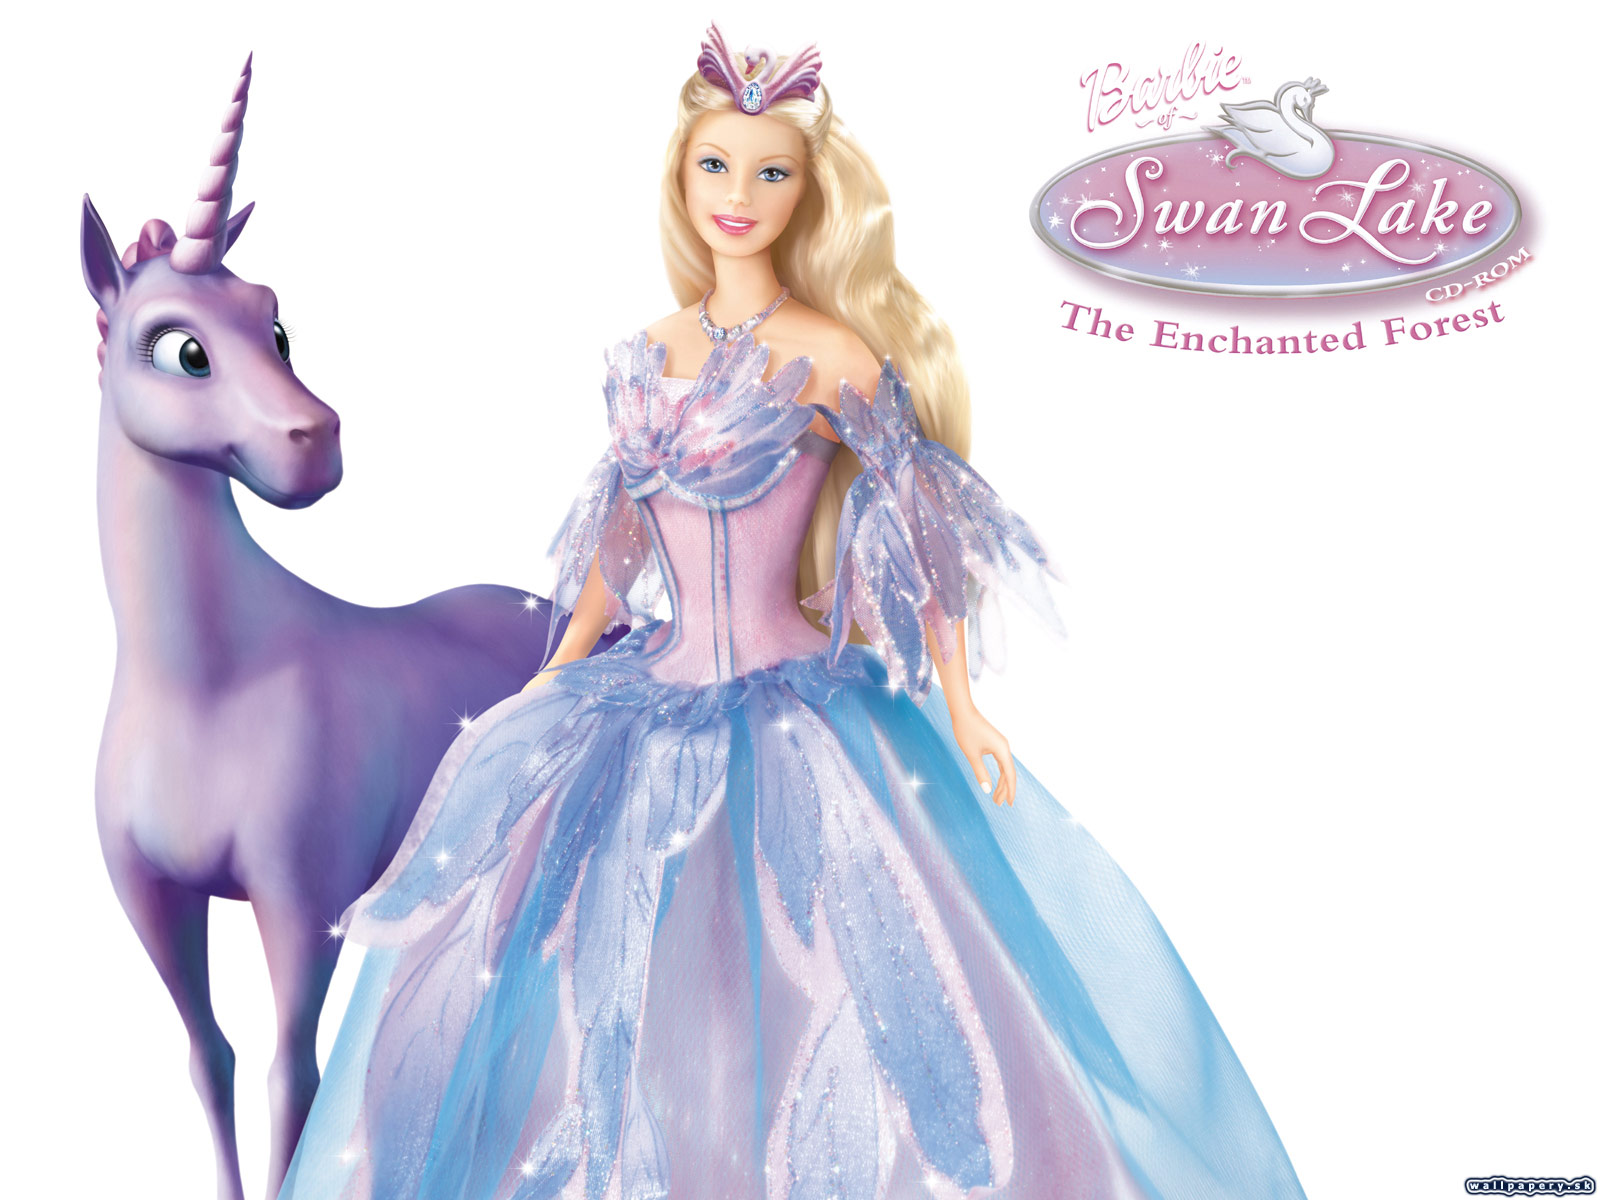 Barbie of Swan Lake: The Enchanted Forest - wallpaper 1